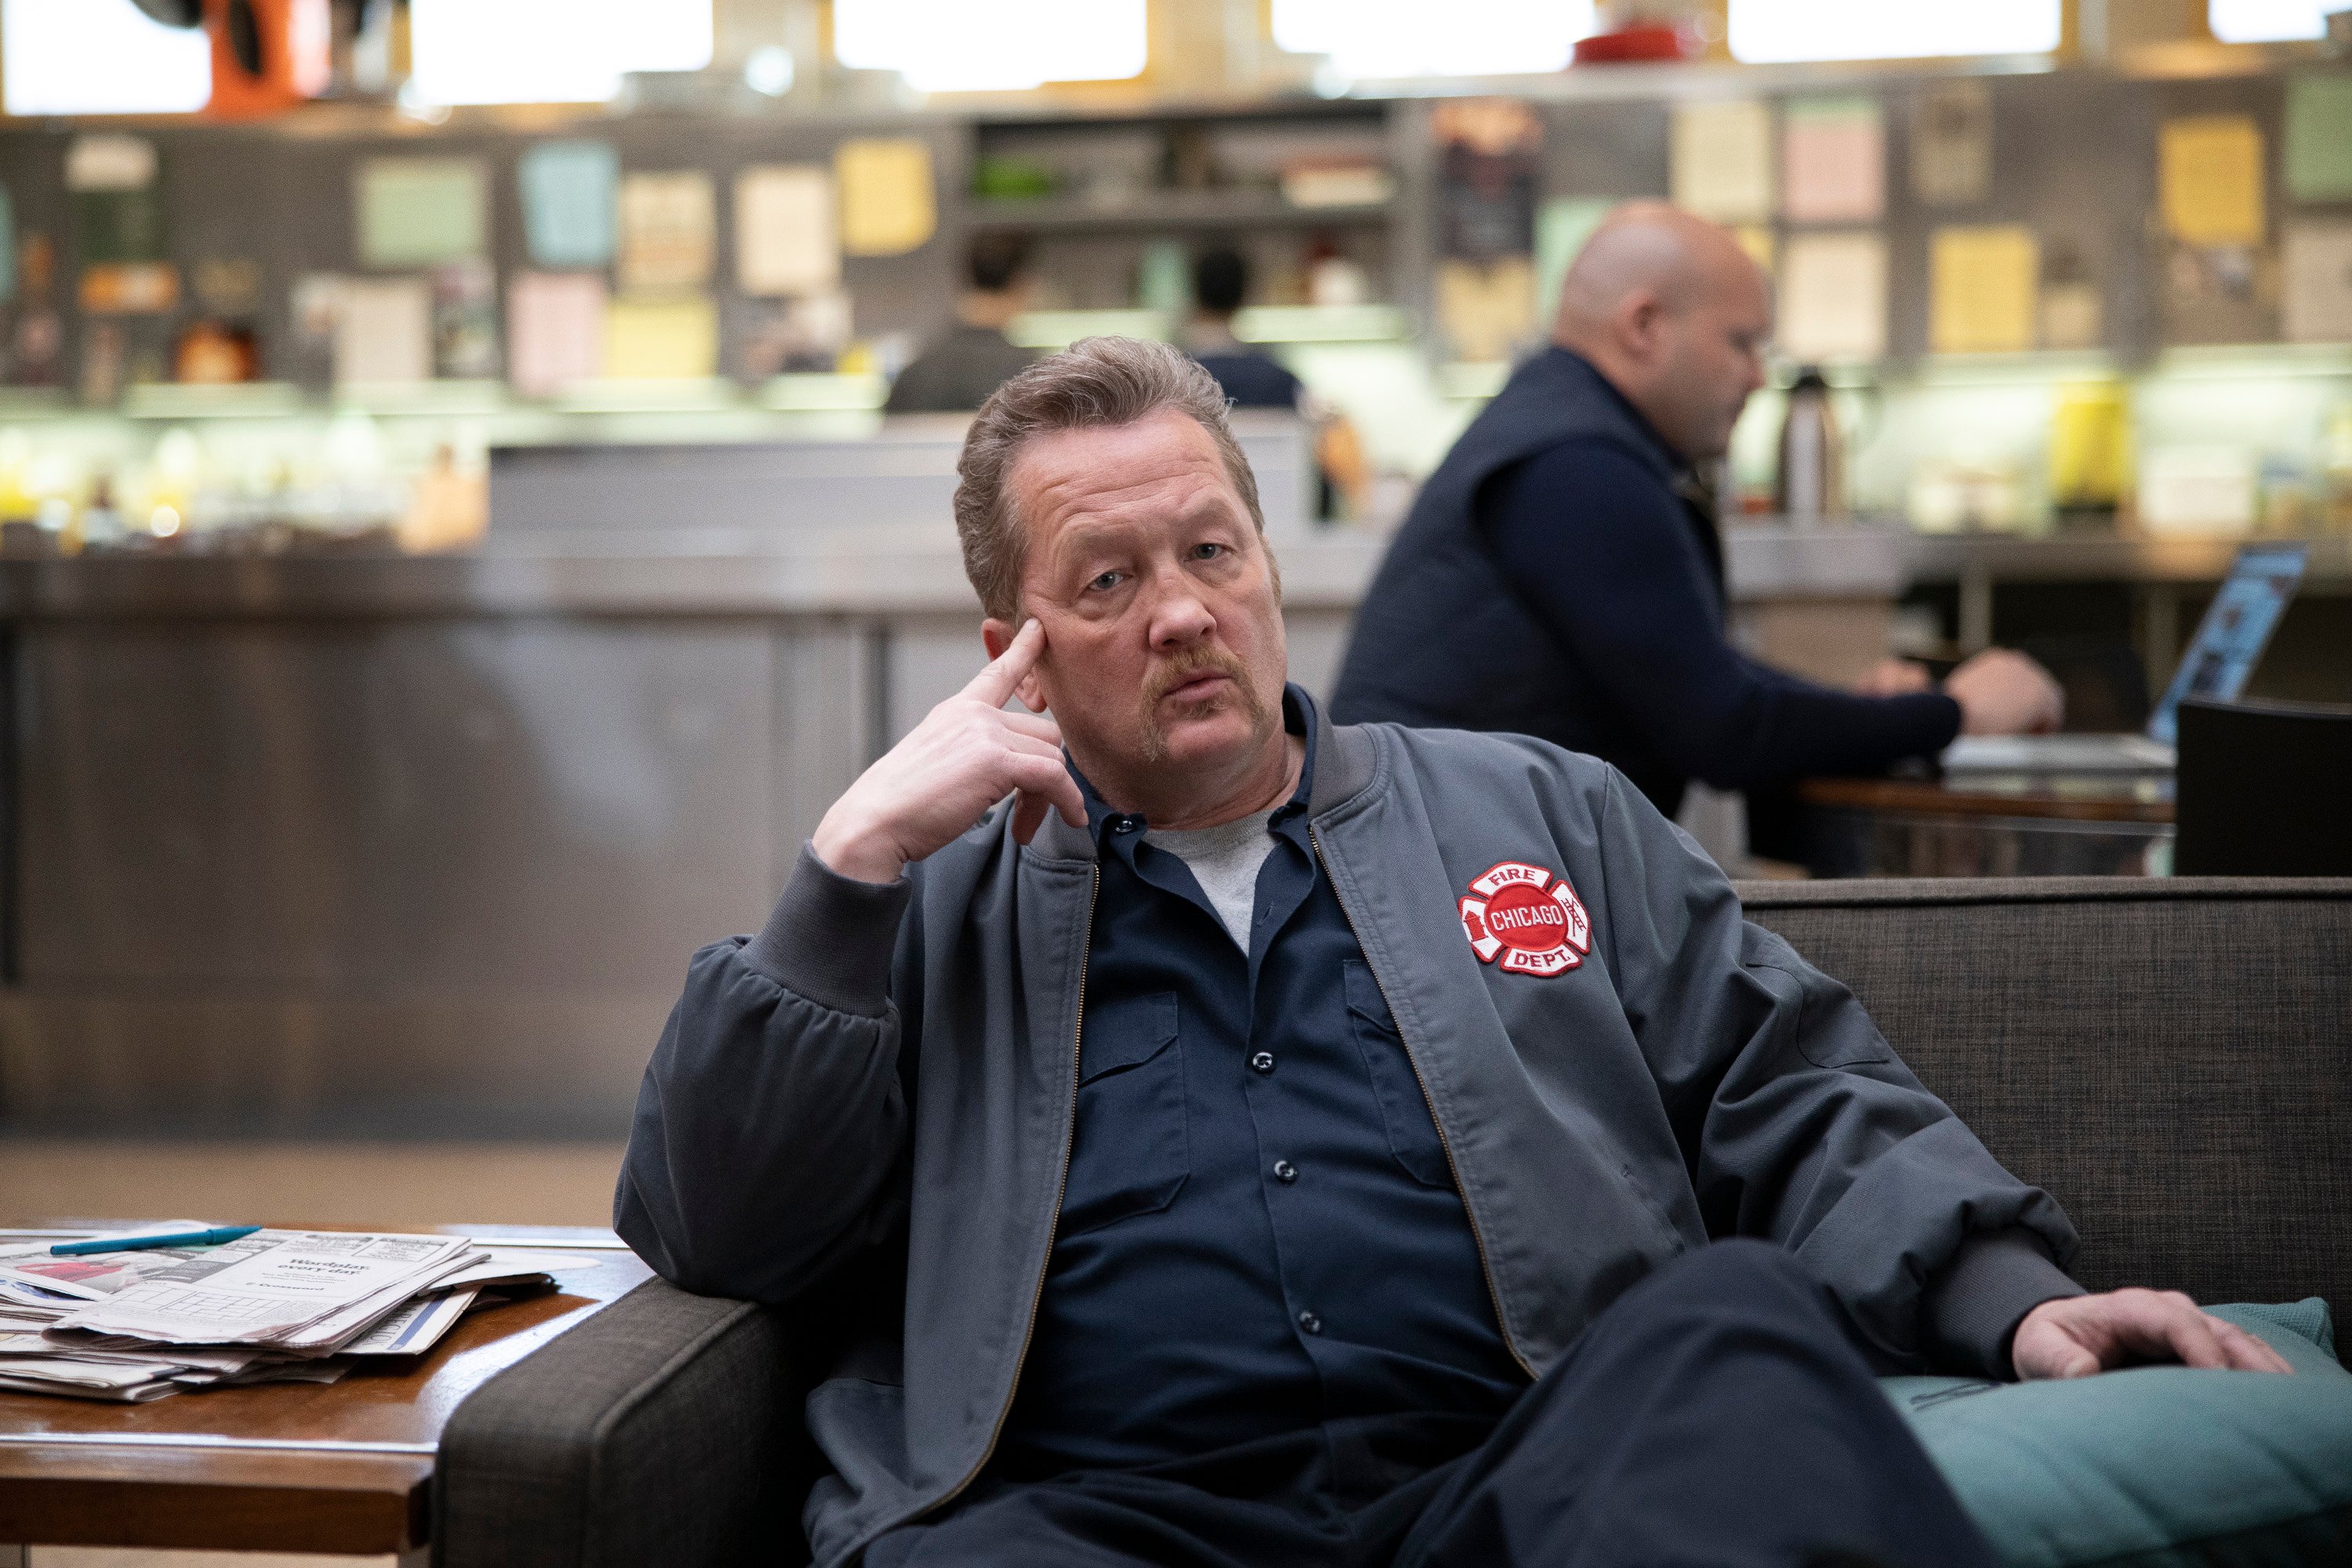 Christian Stolte as Randy 'Mouch' McHolland | Adrian Burrows/NBC/NBCU Photo Bank via Getty Images